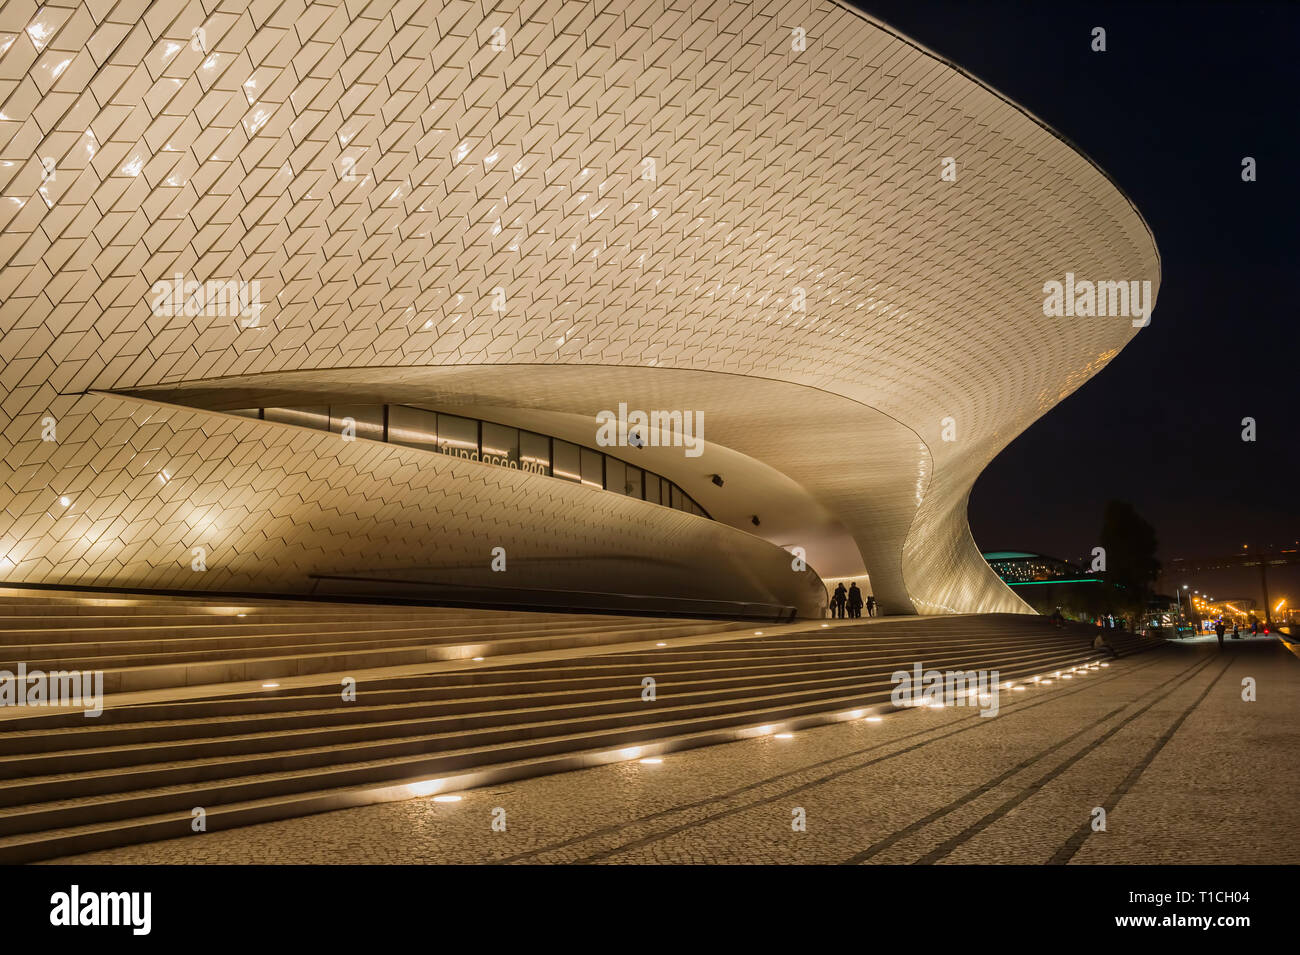 MAAT, Museum of Art Architecture and Technology at night, Belem district, Lisbon, Portugal Stock Photo